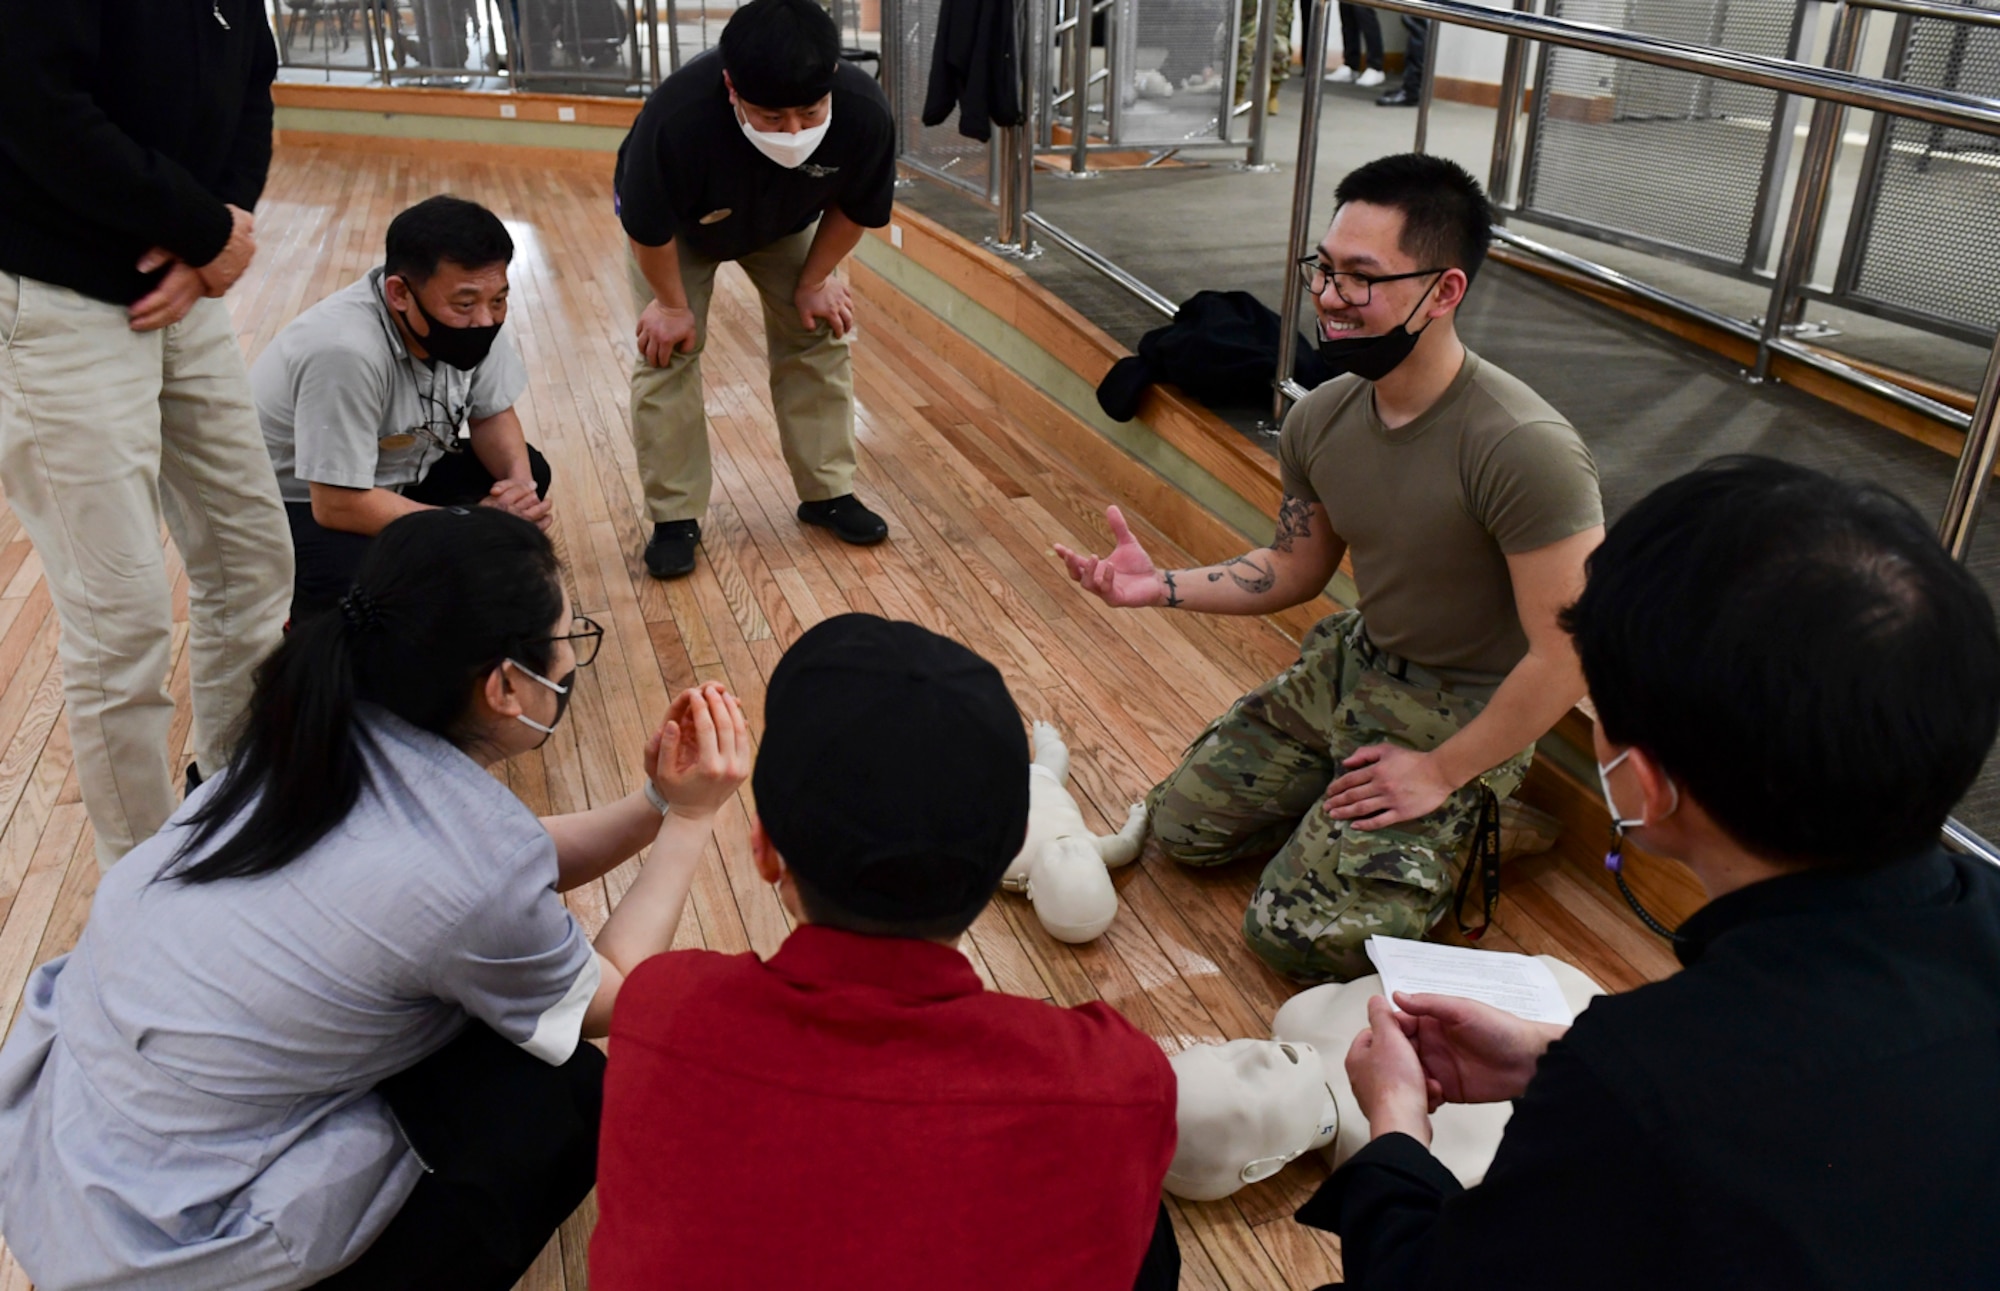 Senior Airman Nathanial Cruz, 51st Medical Group medical technician, teaches the basic practices of cardiopulmonary resuscitation (CPR) to civilian employees at Osan Air Base, Republic of Korea on March 9, 2022. The CPR course provided annual training for base exchange employees, food service workers and first responders.